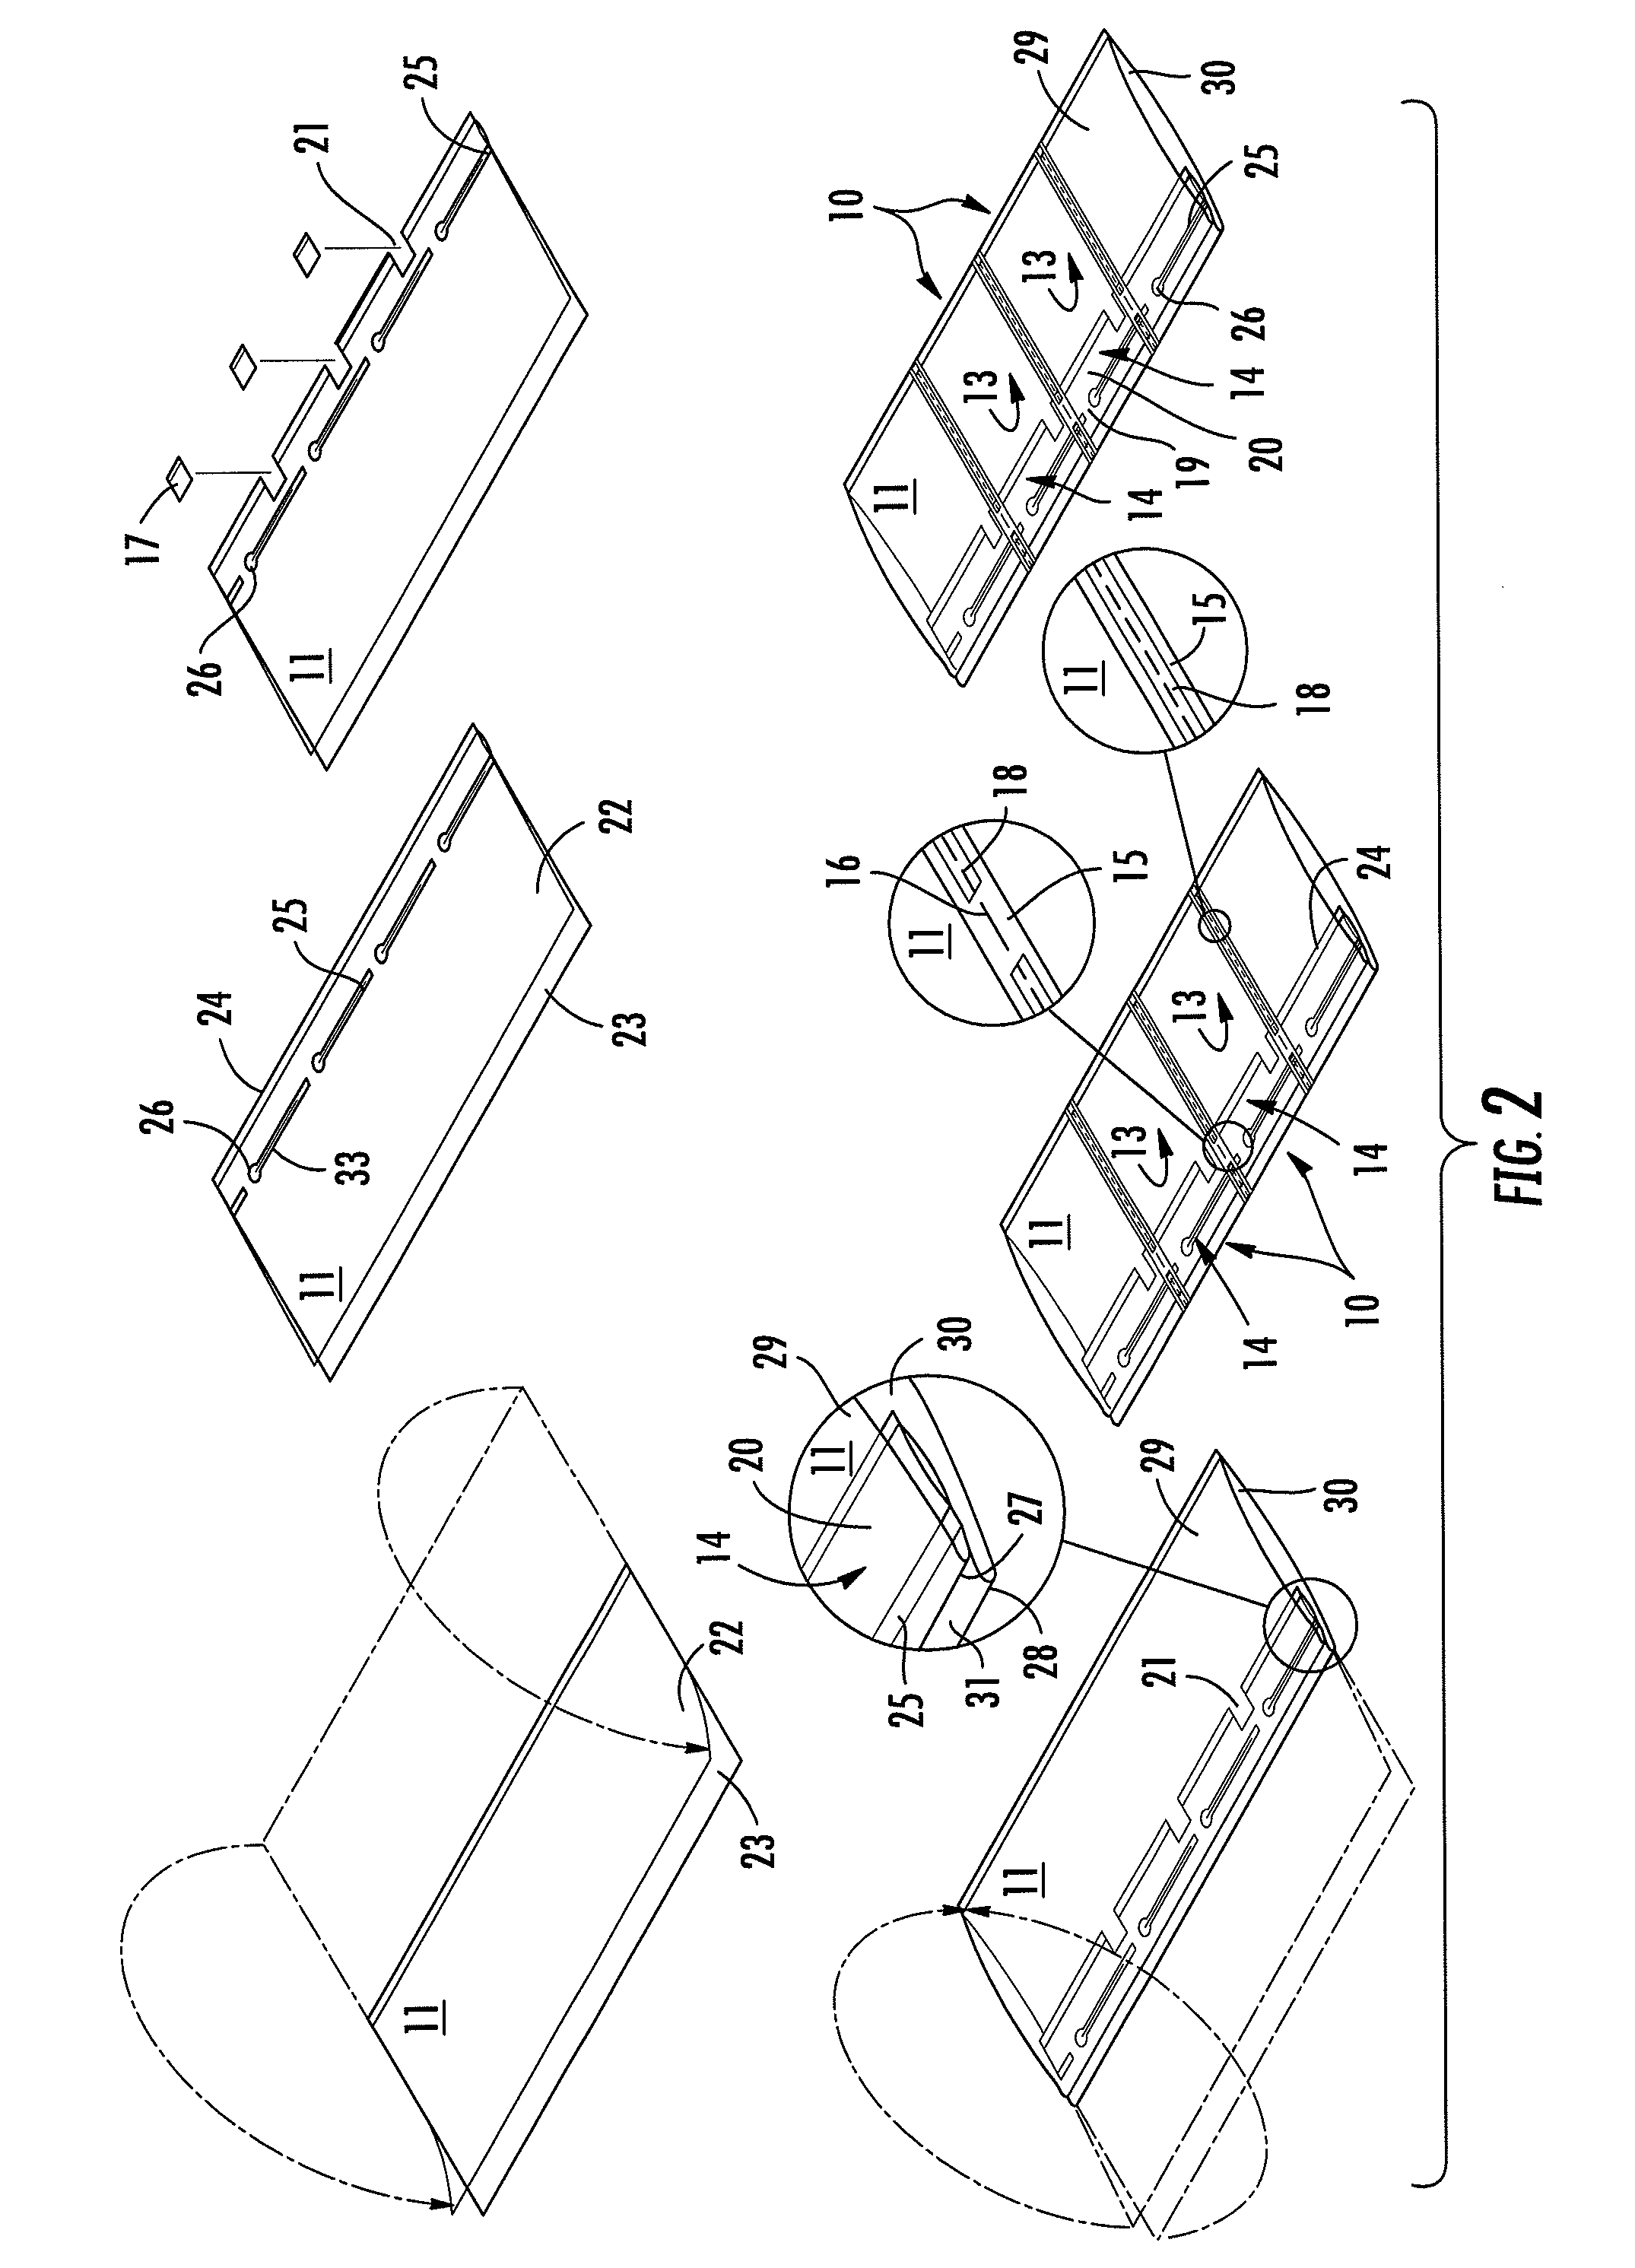 Inflatable structure for packaging and associated apparatus and methods